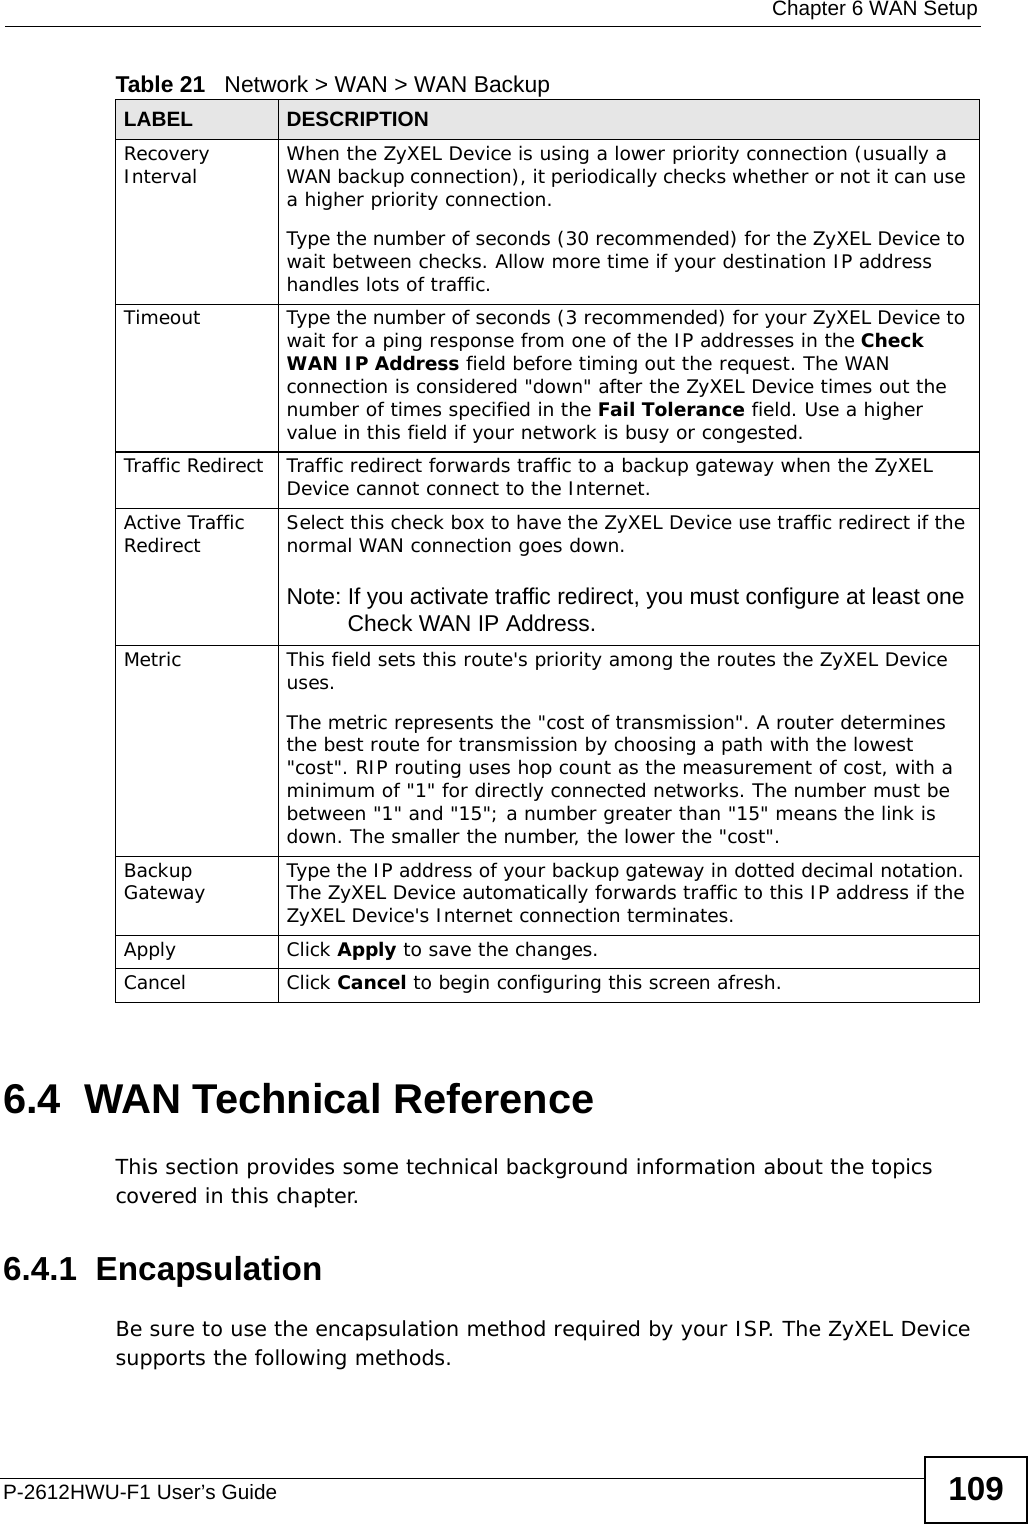  Chapter 6 WAN SetupP-2612HWU-F1 User’s Guide 1096.4  WAN Technical ReferenceThis section provides some technical background information about the topics covered in this chapter.6.4.1  EncapsulationBe sure to use the encapsulation method required by your ISP. The ZyXEL Device supports the following methods.Recovery Interval  When the ZyXEL Device is using a lower priority connection (usually a WAN backup connection), it periodically checks whether or not it can use a higher priority connection.Type the number of seconds (30 recommended) for the ZyXEL Device to wait between checks. Allow more time if your destination IP address handles lots of traffic.Timeout  Type the number of seconds (3 recommended) for your ZyXEL Device to wait for a ping response from one of the IP addresses in the Check WAN IP Address field before timing out the request. The WAN connection is considered &quot;down&quot; after the ZyXEL Device times out the number of times specified in the Fail Tolerance field. Use a higher value in this field if your network is busy or congested.Traffic Redirect  Traffic redirect forwards traffic to a backup gateway when the ZyXEL Device cannot connect to the Internet.Active Traffic Redirect Select this check box to have the ZyXEL Device use traffic redirect if the normal WAN connection goes down.Note: If you activate traffic redirect, you must configure at least one Check WAN IP Address.Metric This field sets this route&apos;s priority among the routes the ZyXEL Device uses. The metric represents the &quot;cost of transmission&quot;. A router determines the best route for transmission by choosing a path with the lowest &quot;cost&quot;. RIP routing uses hop count as the measurement of cost, with a minimum of &quot;1&quot; for directly connected networks. The number must be between &quot;1&quot; and &quot;15&quot;; a number greater than &quot;15&quot; means the link is down. The smaller the number, the lower the &quot;cost&quot;.Backup Gateway Type the IP address of your backup gateway in dotted decimal notation. The ZyXEL Device automatically forwards traffic to this IP address if the ZyXEL Device&apos;s Internet connection terminates. Apply Click Apply to save the changes. Cancel Click Cancel to begin configuring this screen afresh.Table 21   Network &gt; WAN &gt; WAN BackupLABEL DESCRIPTION